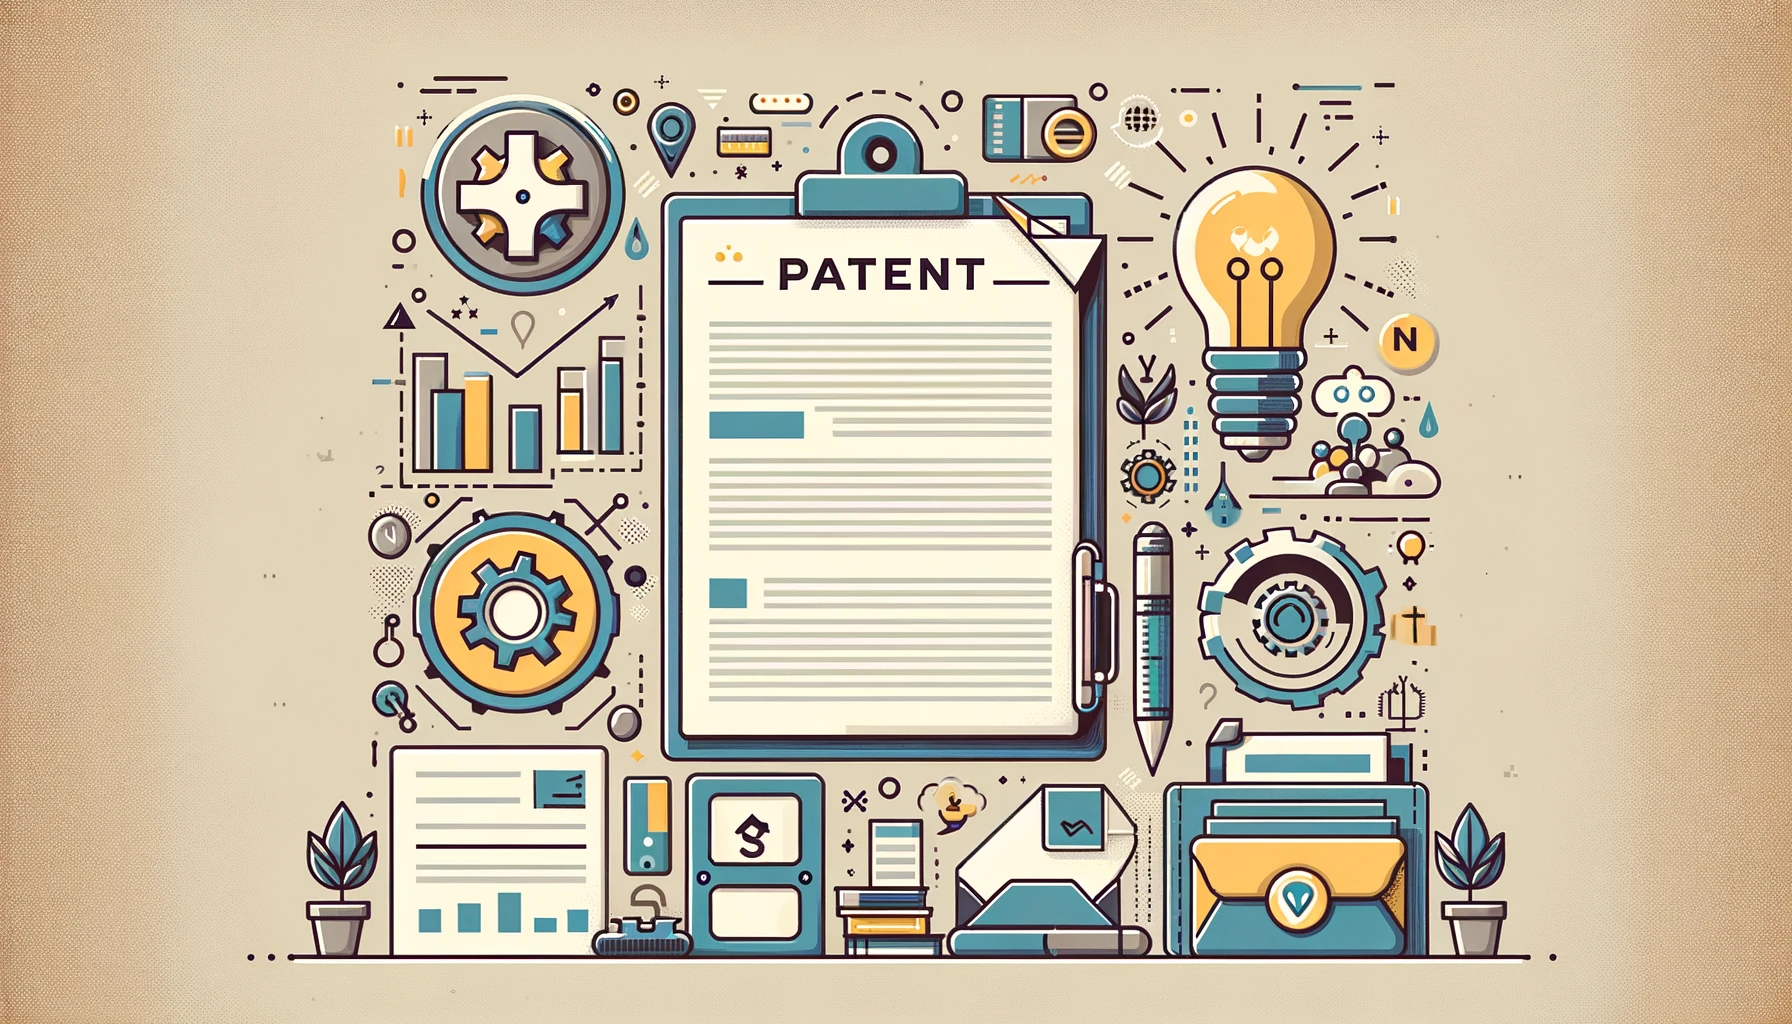 Featured image for “Patent Filing for Startups in India”